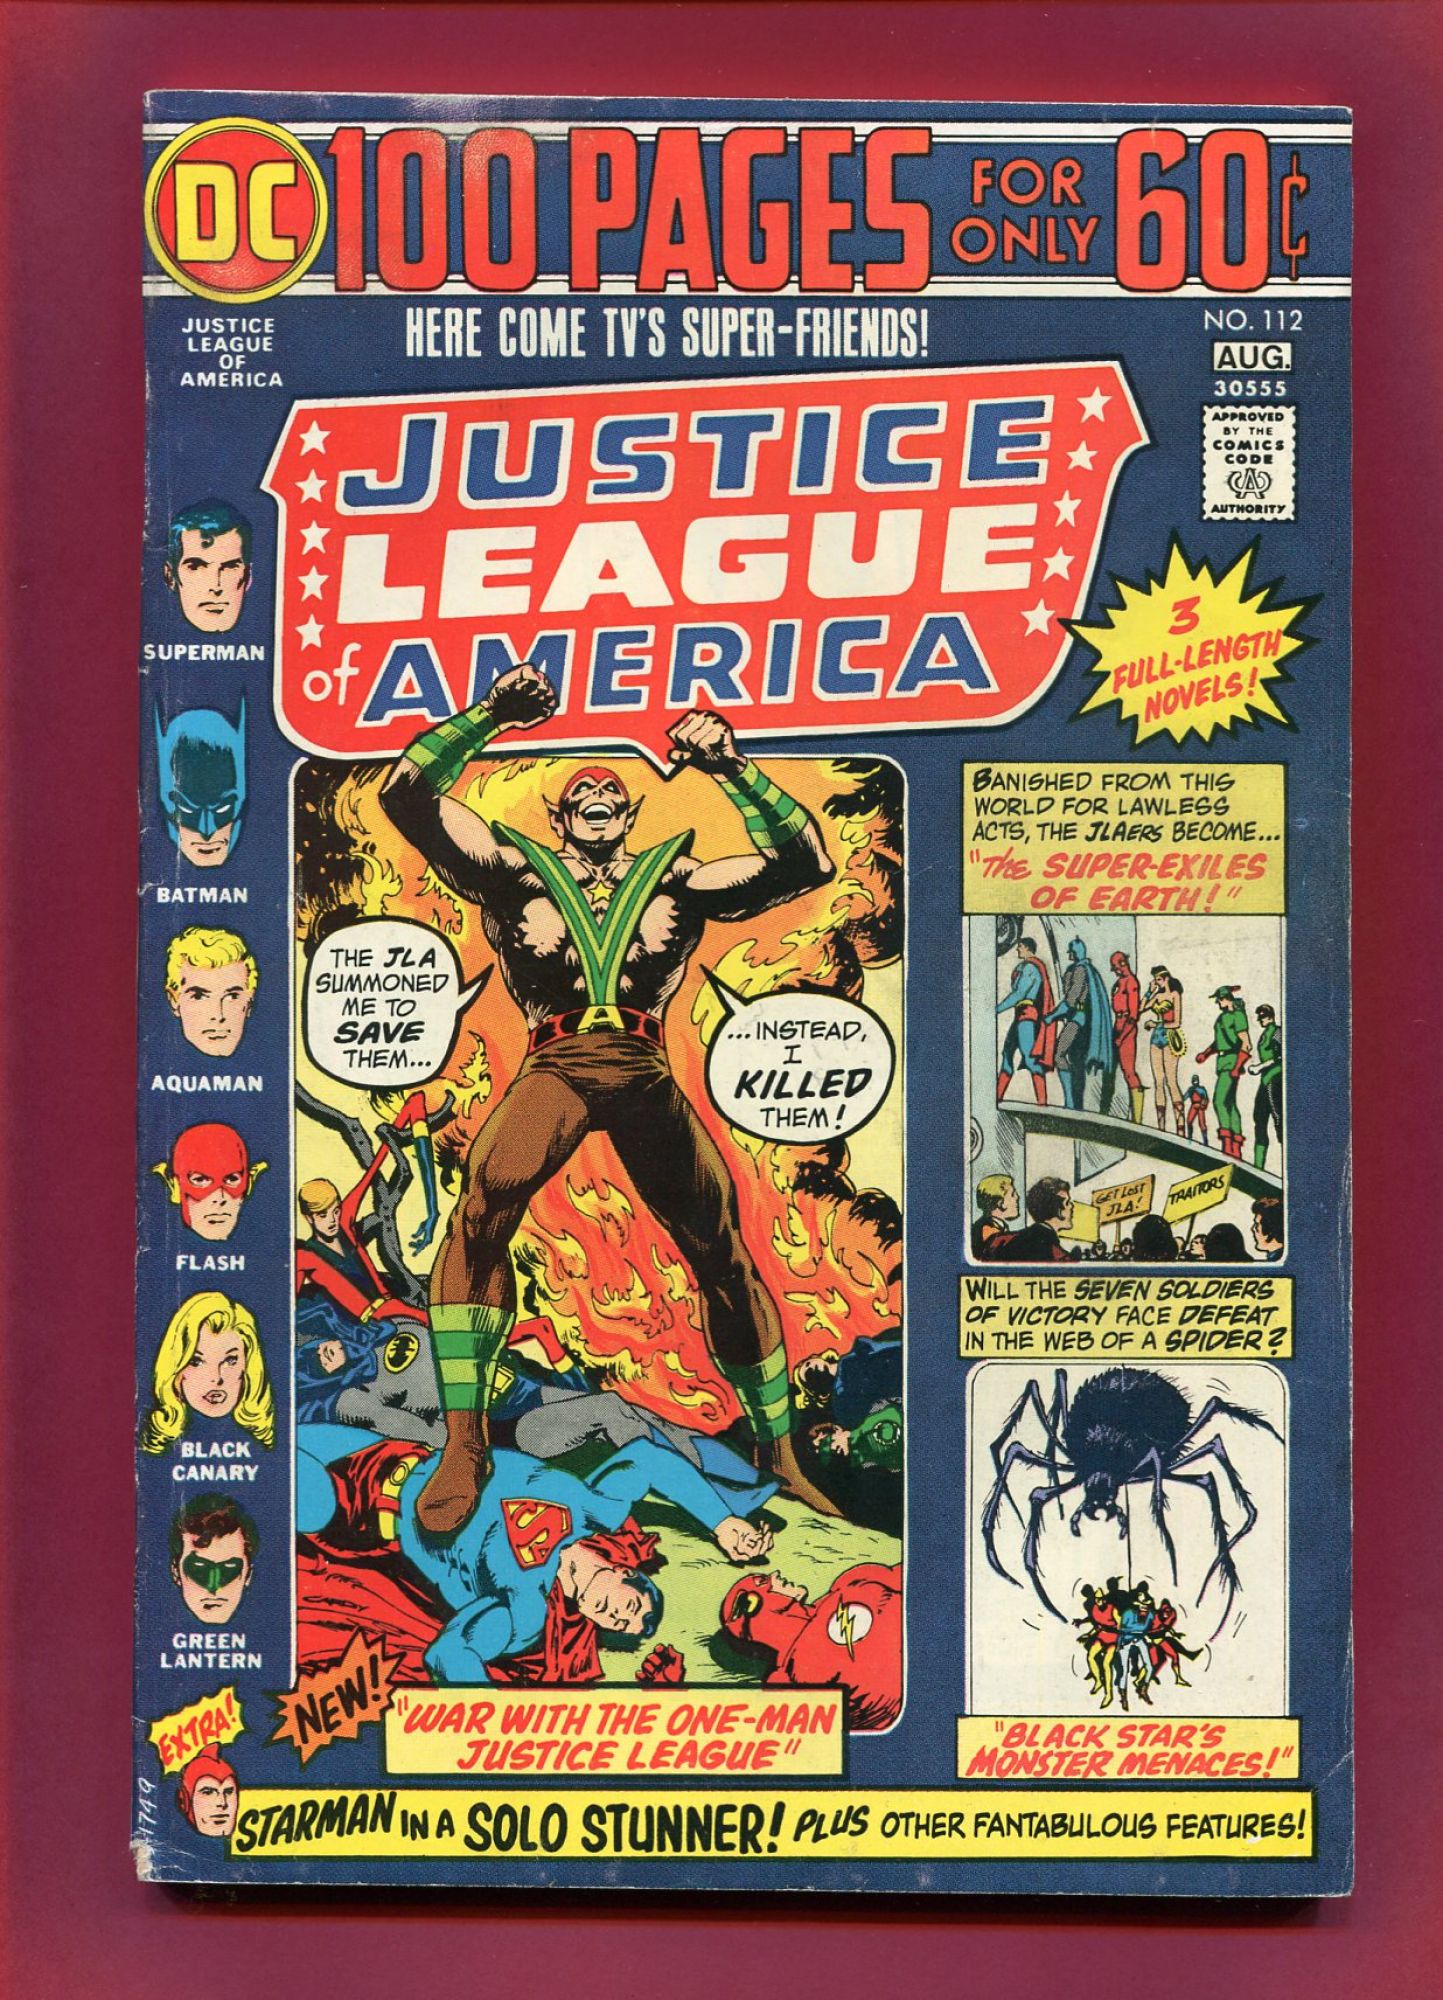 Justice League of America #112, Aug 1974, 6.0 FN